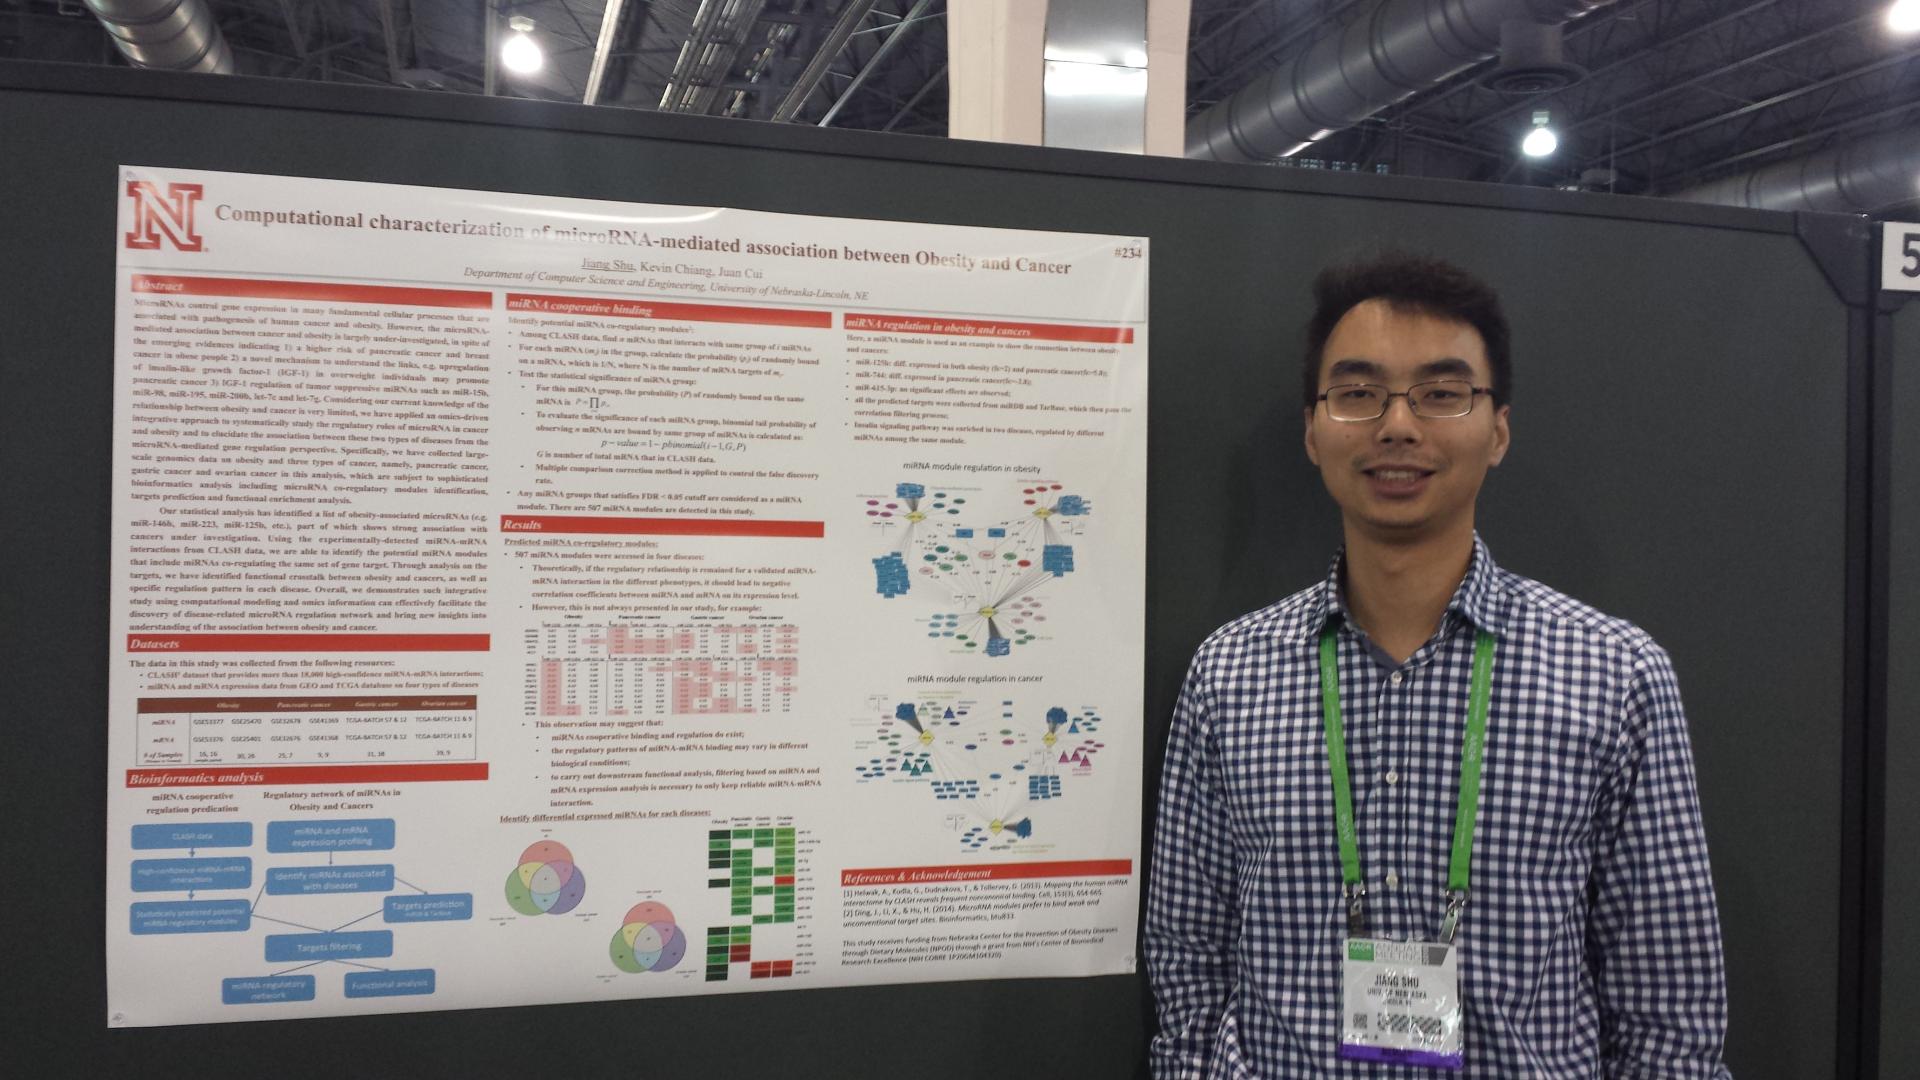 AACR2015